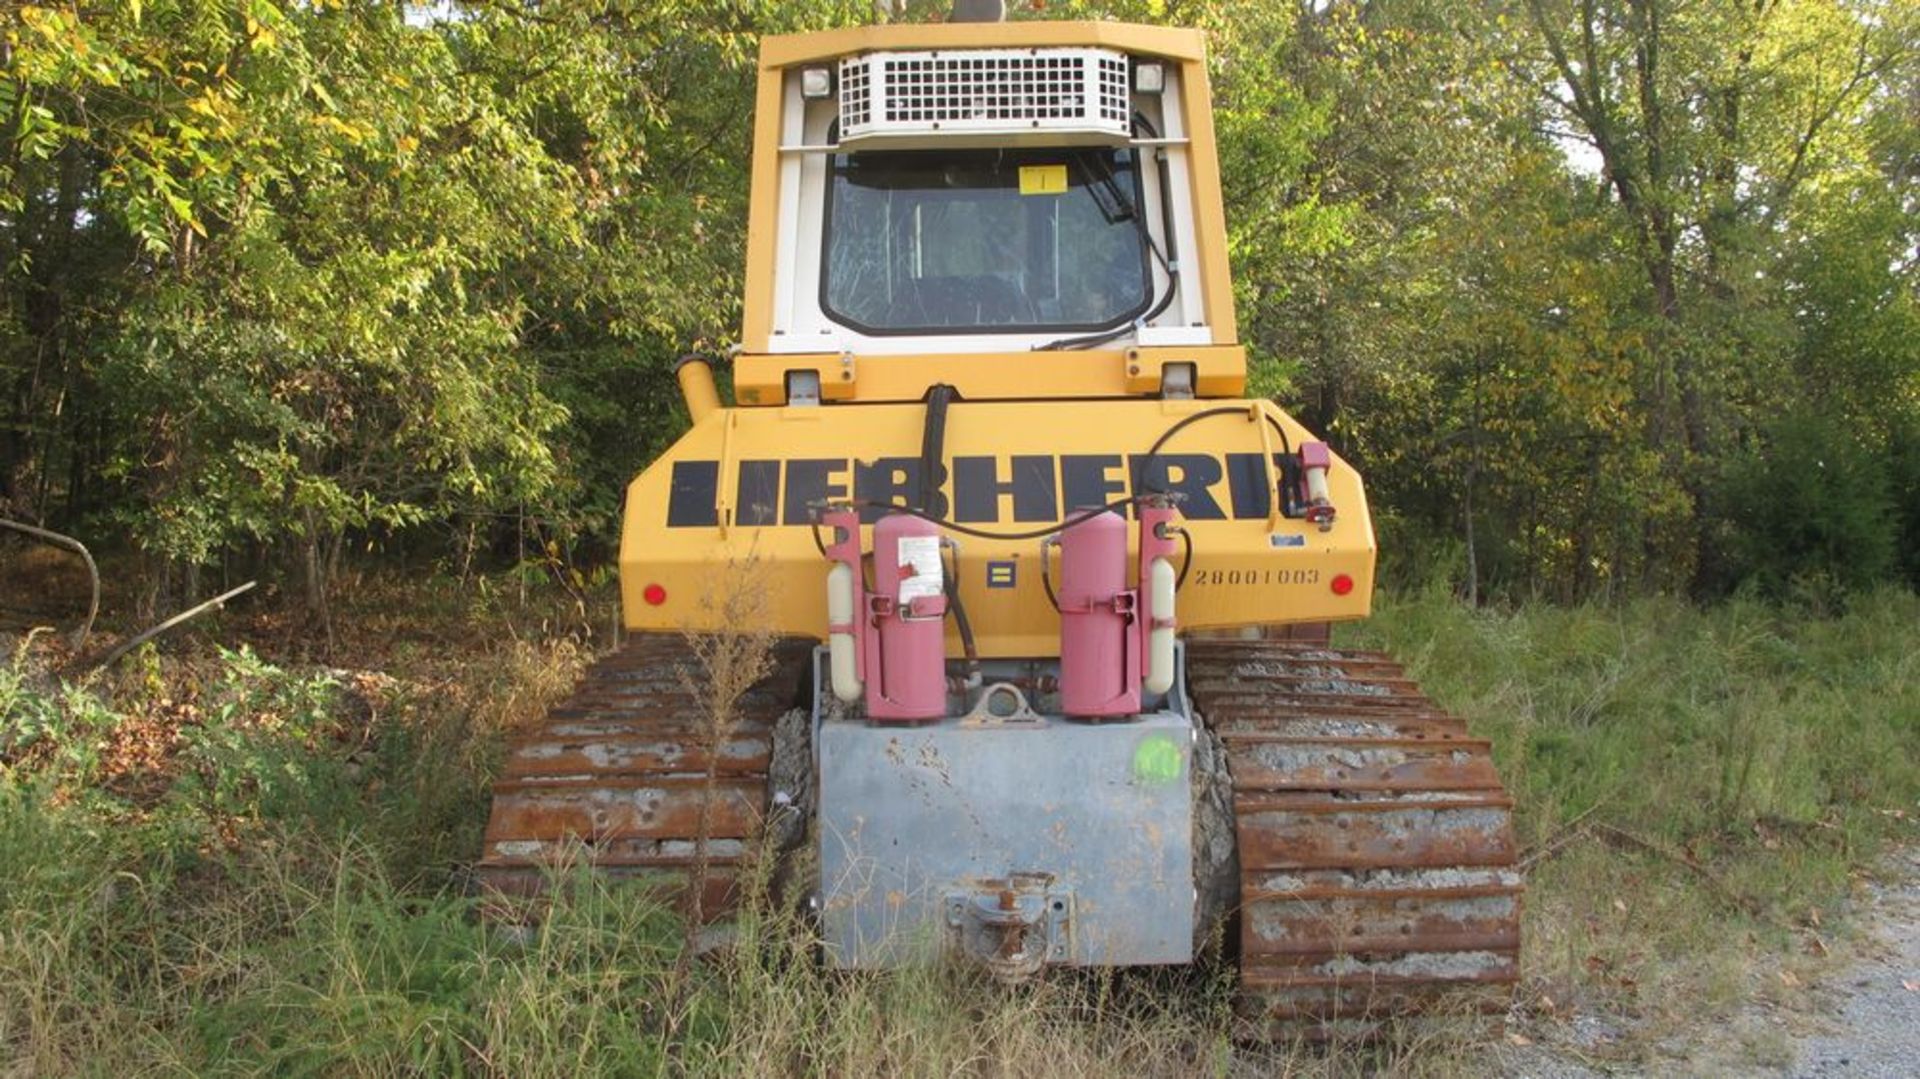 LIEBHERR 734 DOZER, PR 734LGP, S/N 726-6809 (NEEDS REPAIR) CLIMATE CONTROLLED CAB, STEREO (LAND FILL - Image 2 of 17